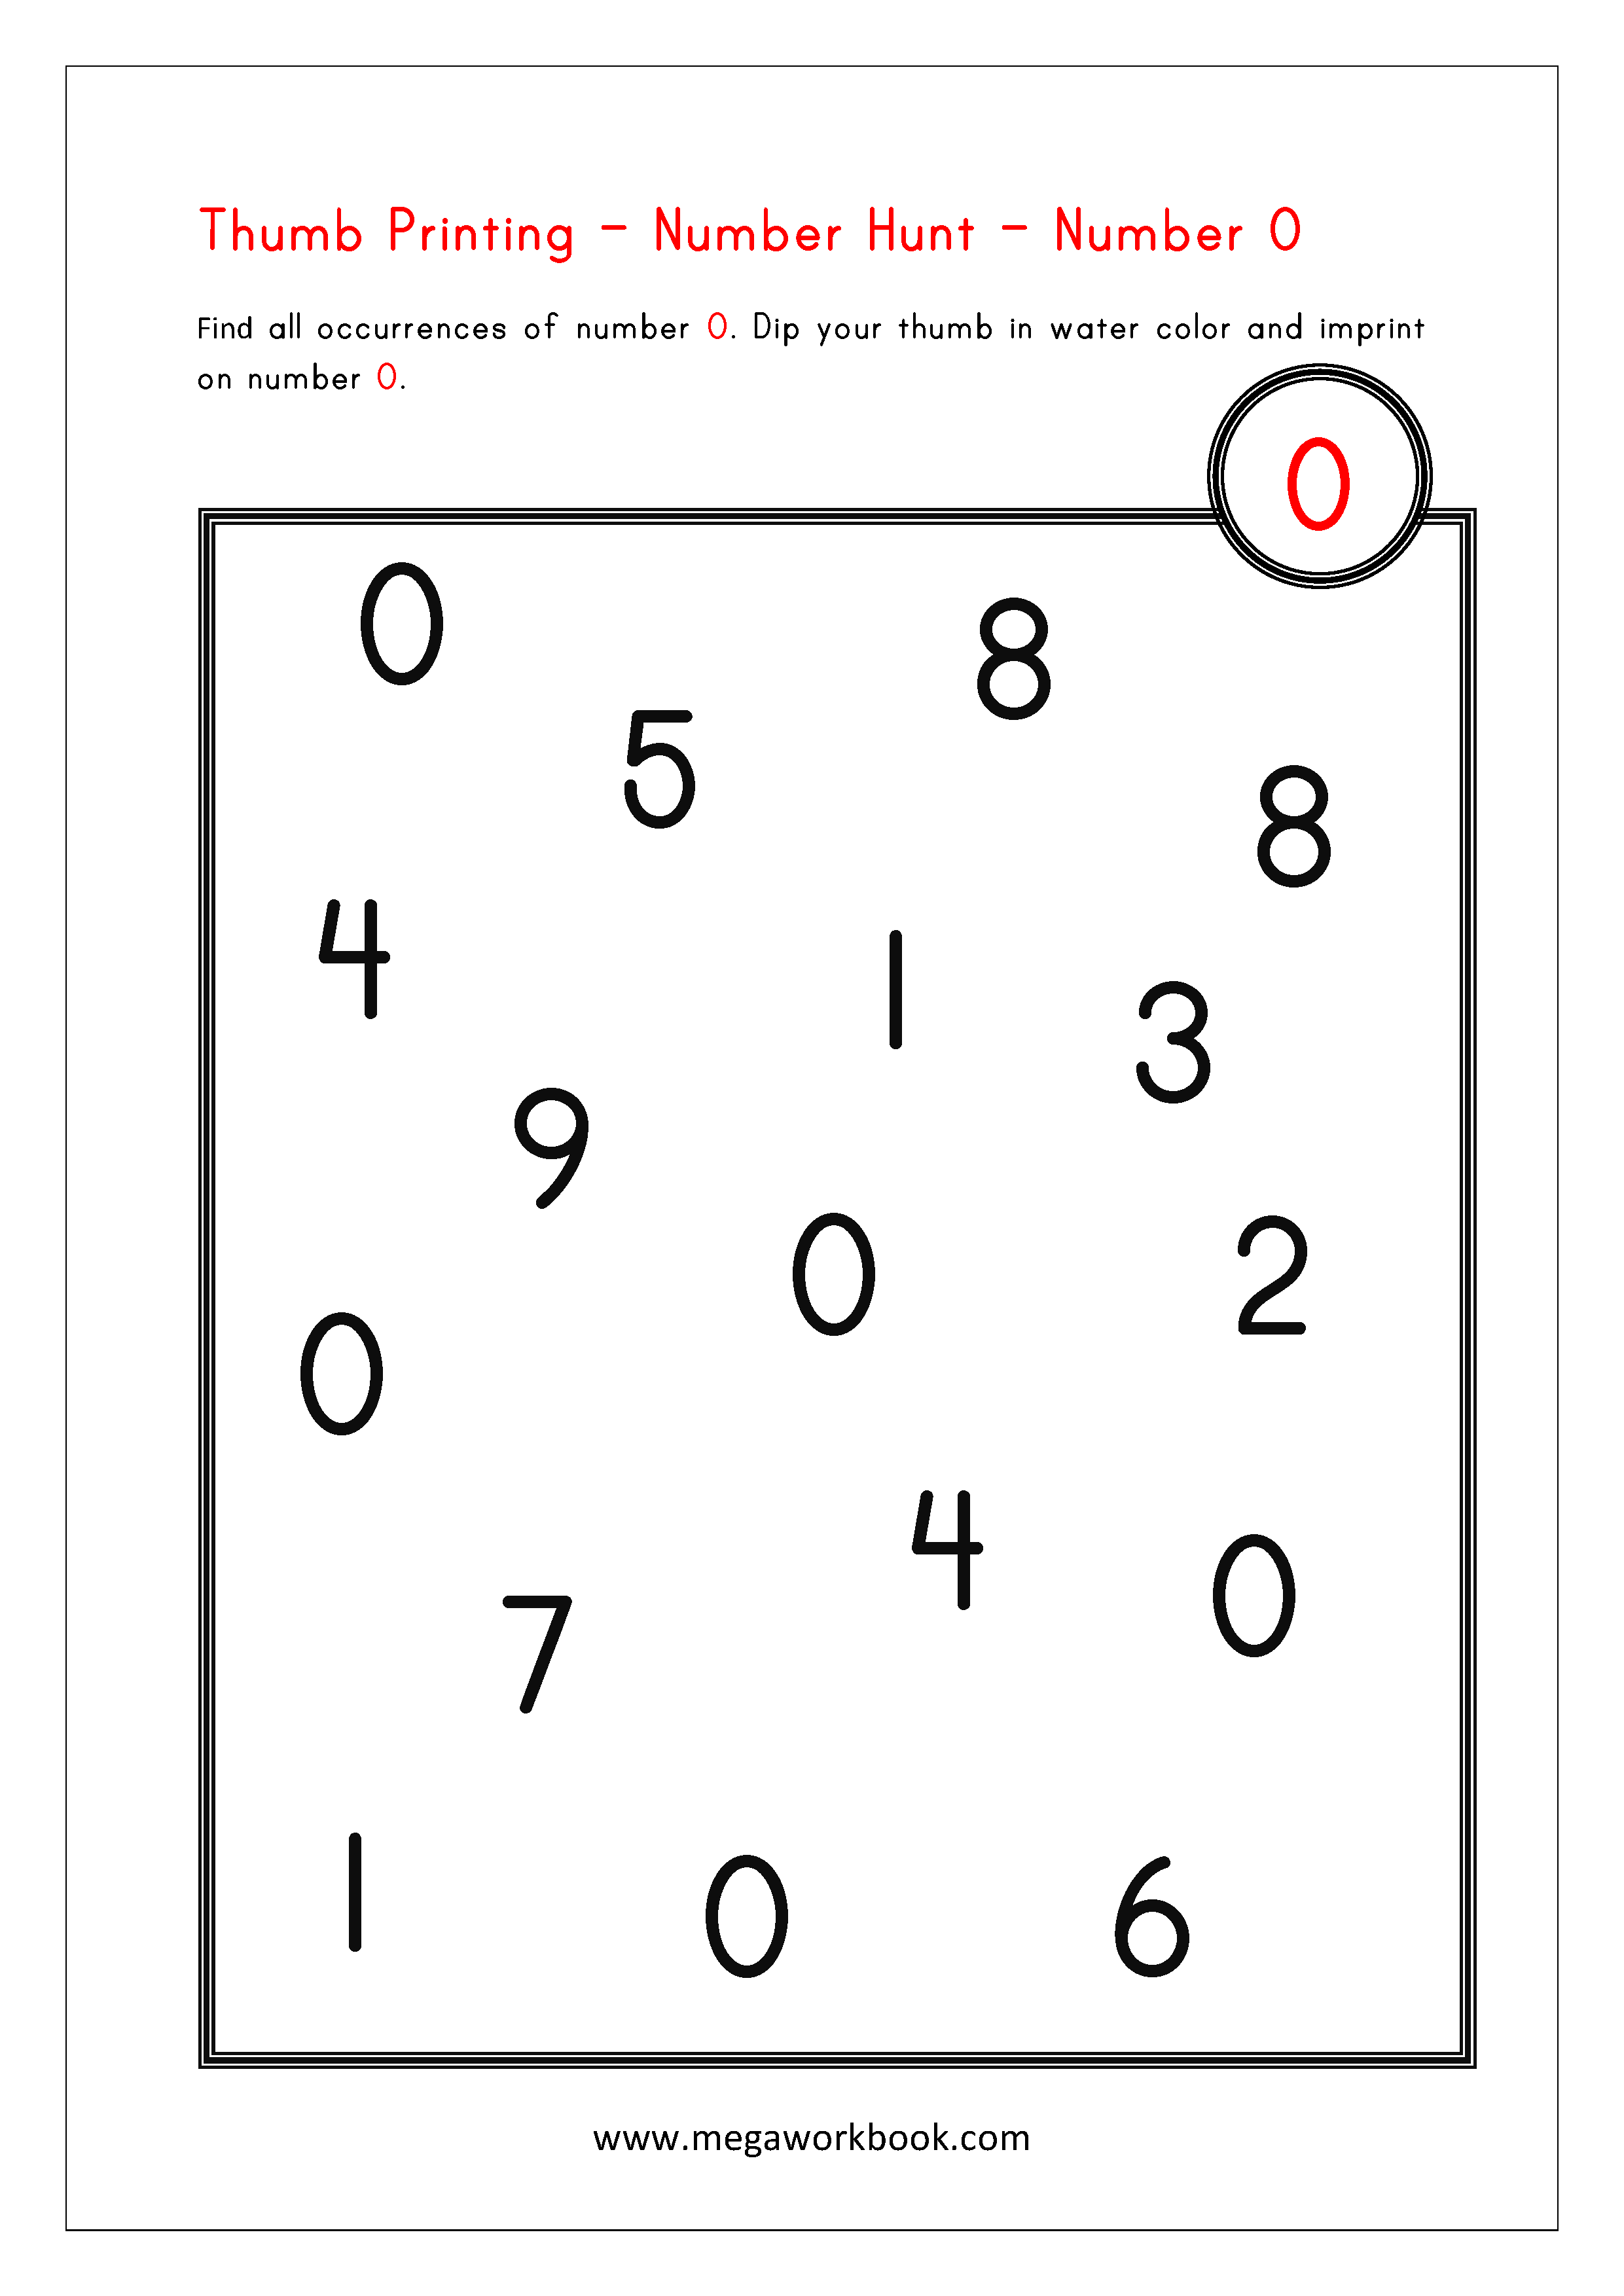 touch-math-worksheets-generator-you-wont-believe-this-42-hidden-facts